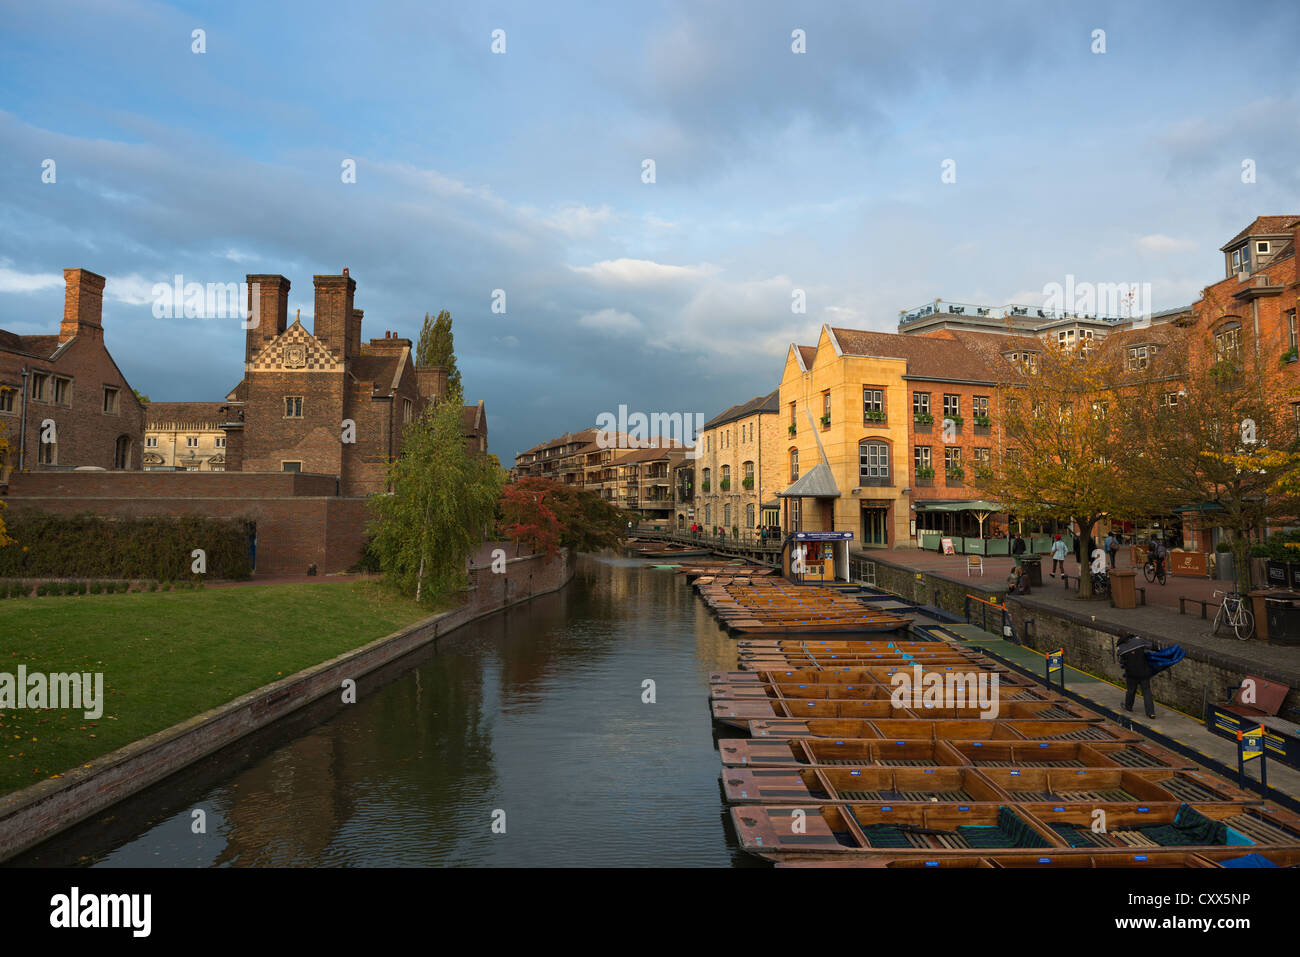 Magdalene College and 'The Quayside' on banks of river Cam in Autumn, Cambridge, England, UK. Stock Photo